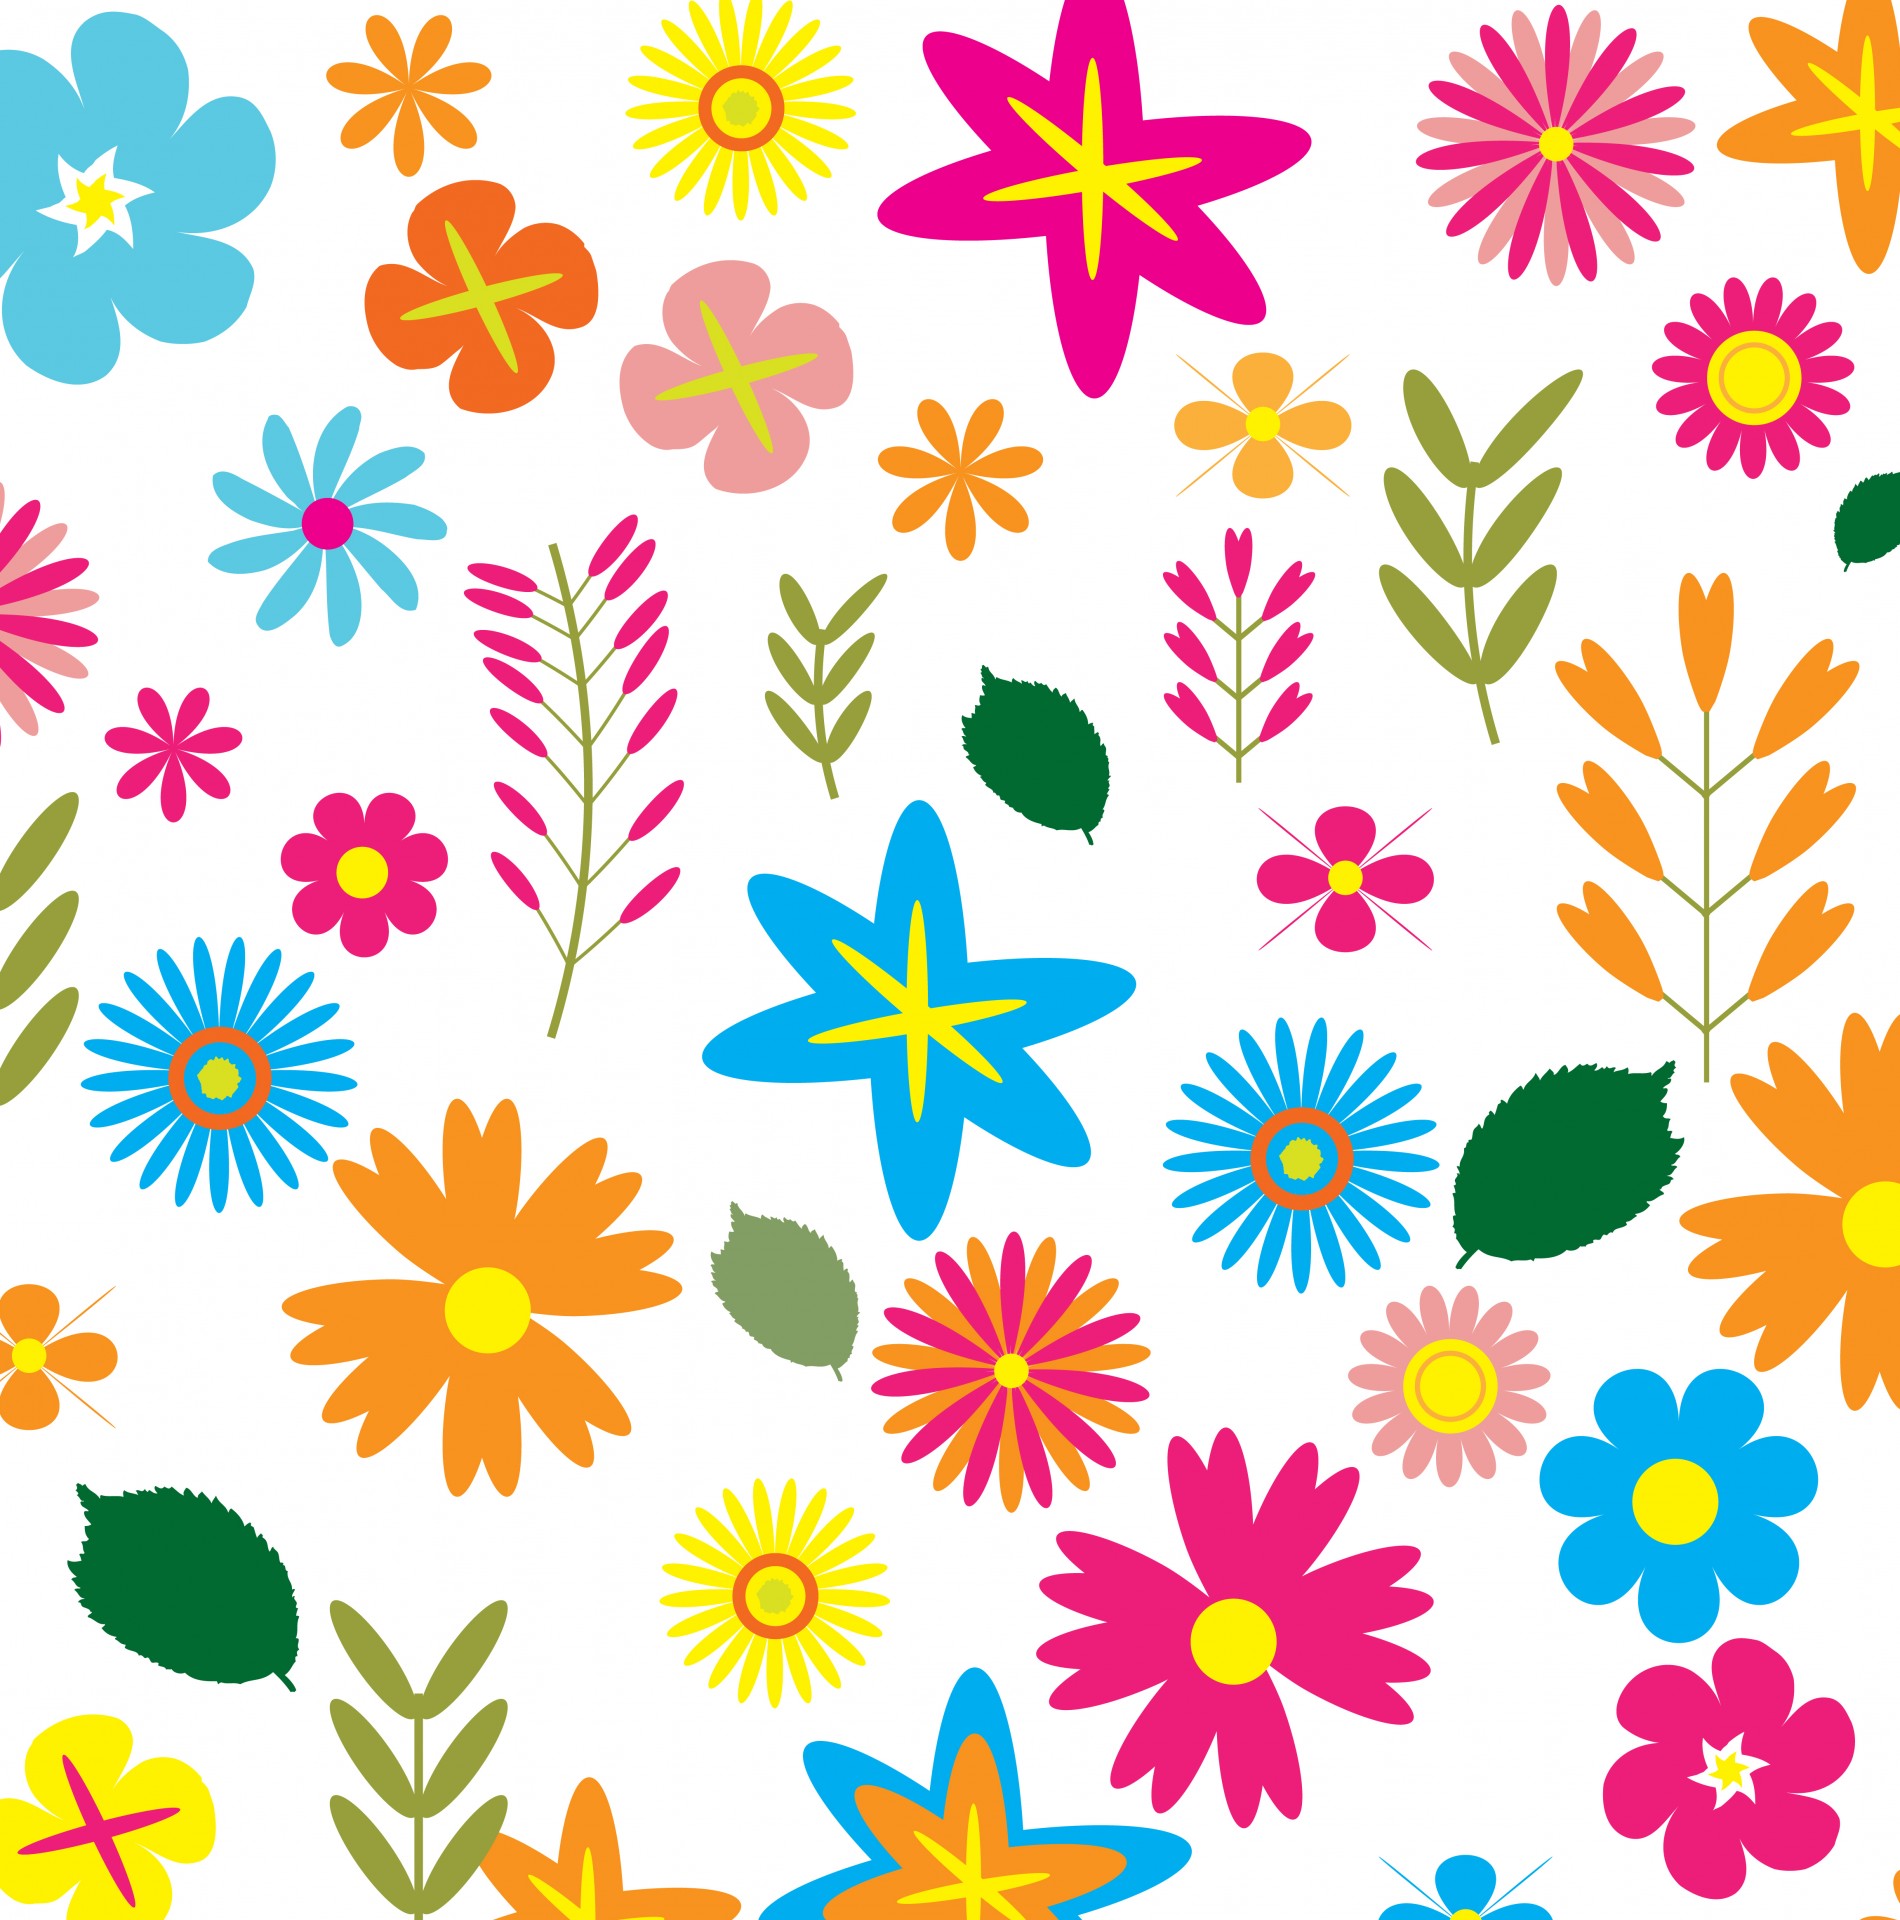 Download free photo of Floral,flowers,background,colorful,pattern - from  